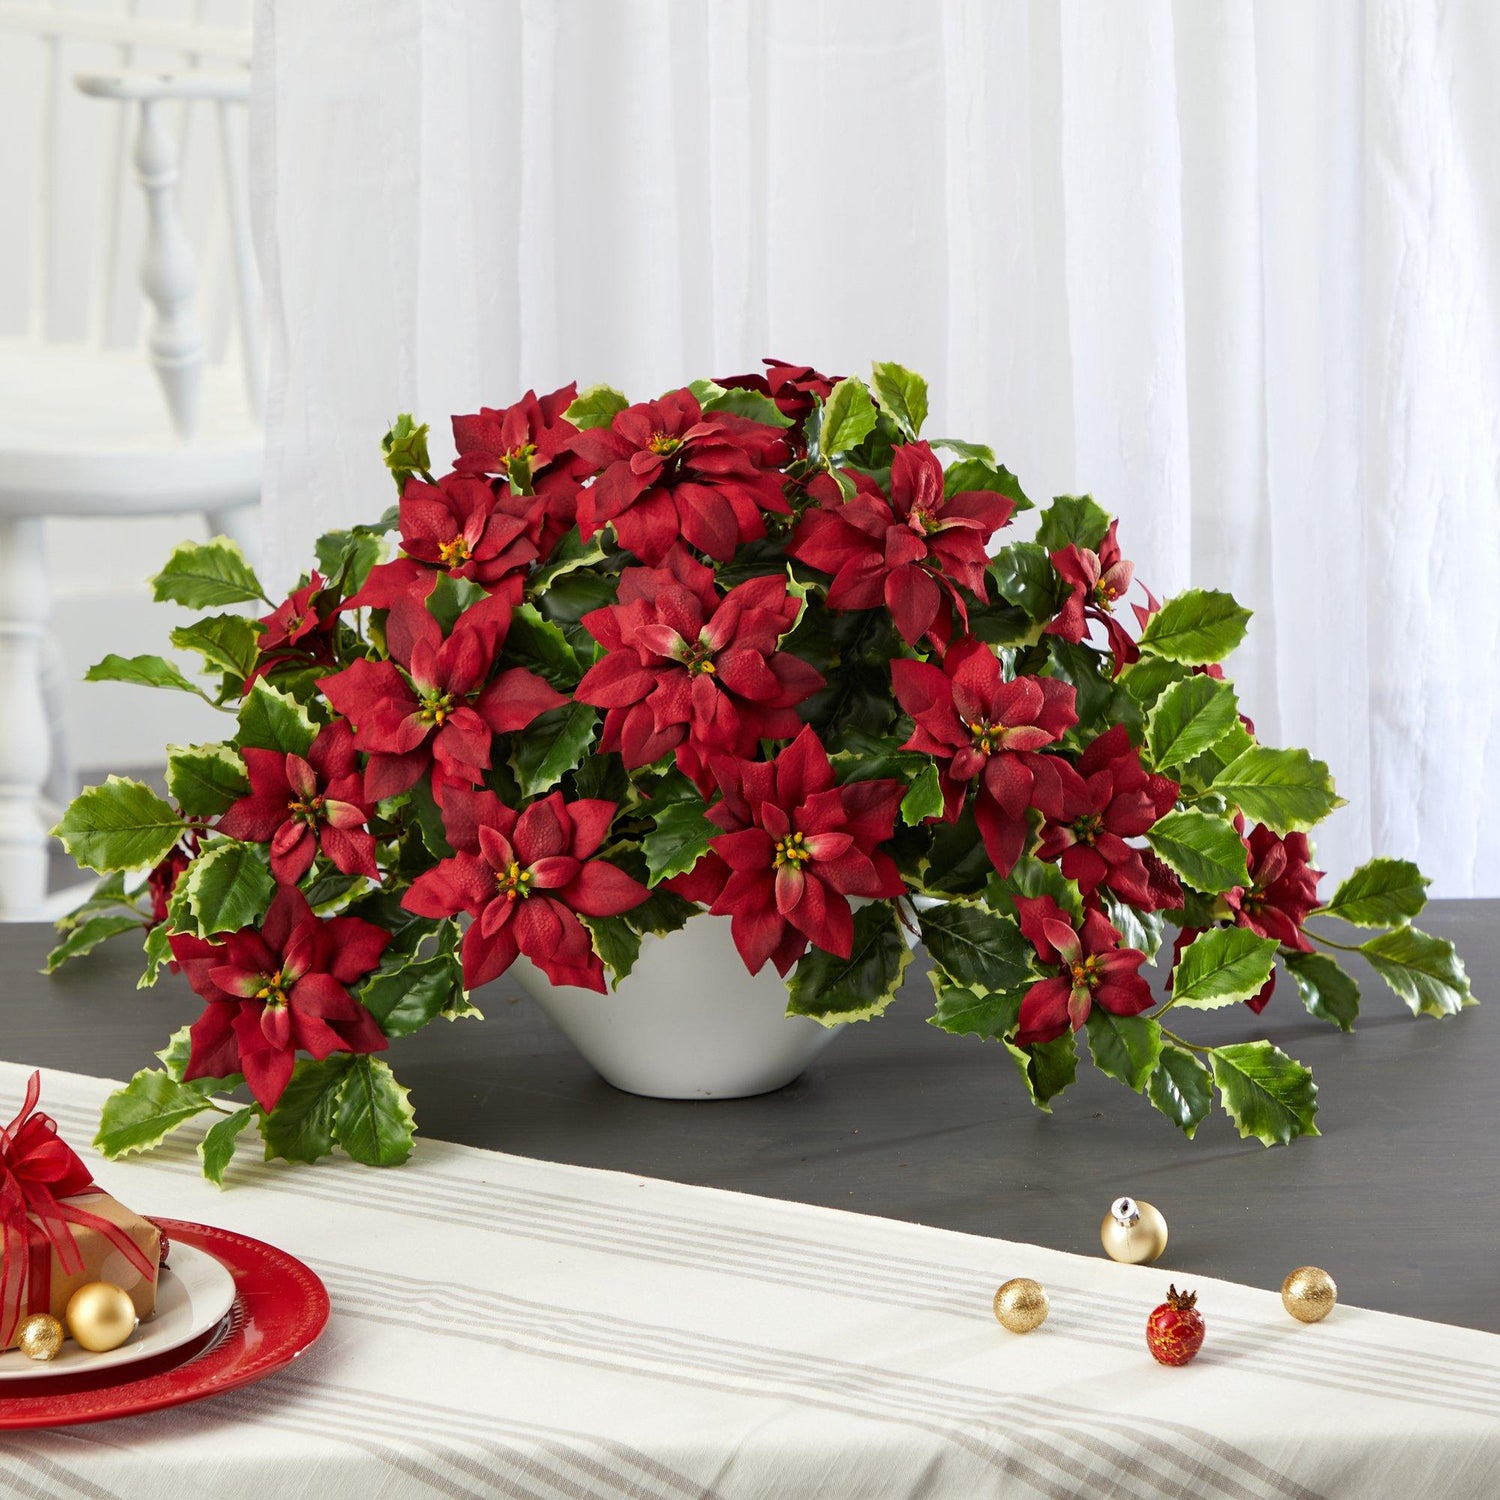 20” Poinsettia and Variegated Holly Artificial Plant in Oval White Planter (Real Touch)